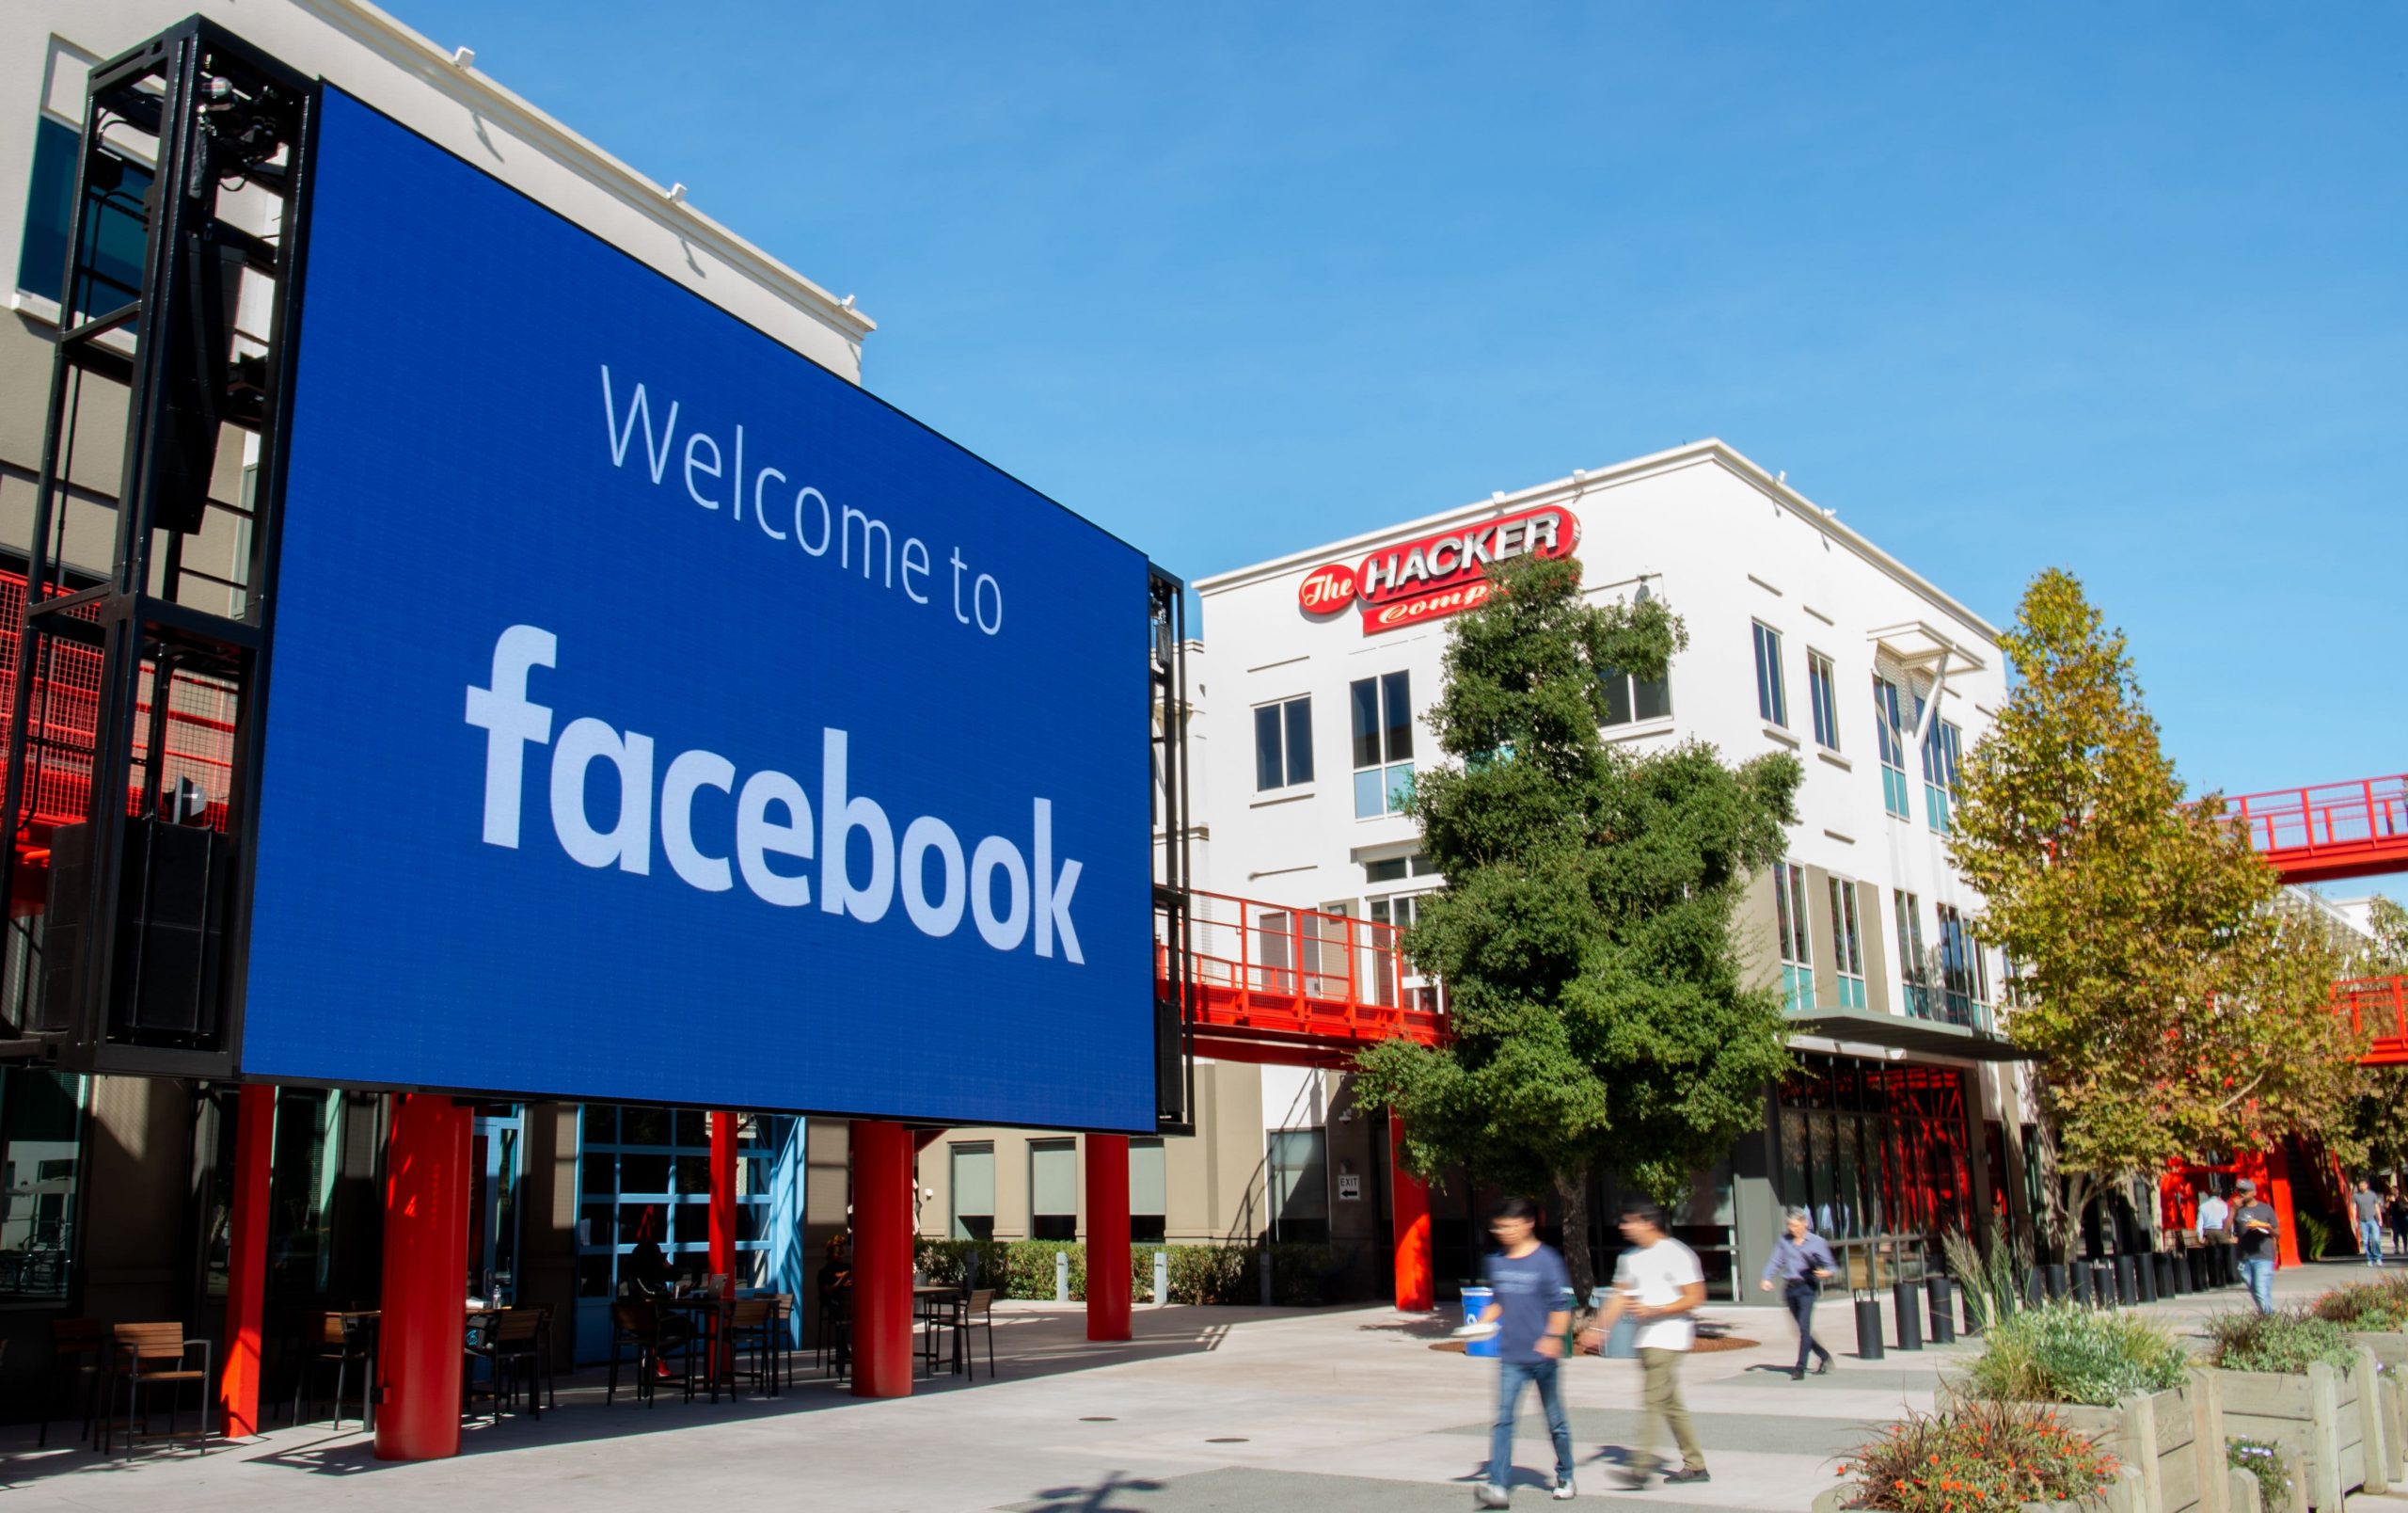 Facebook will use part of its headquarters as a public Covid vaccination site